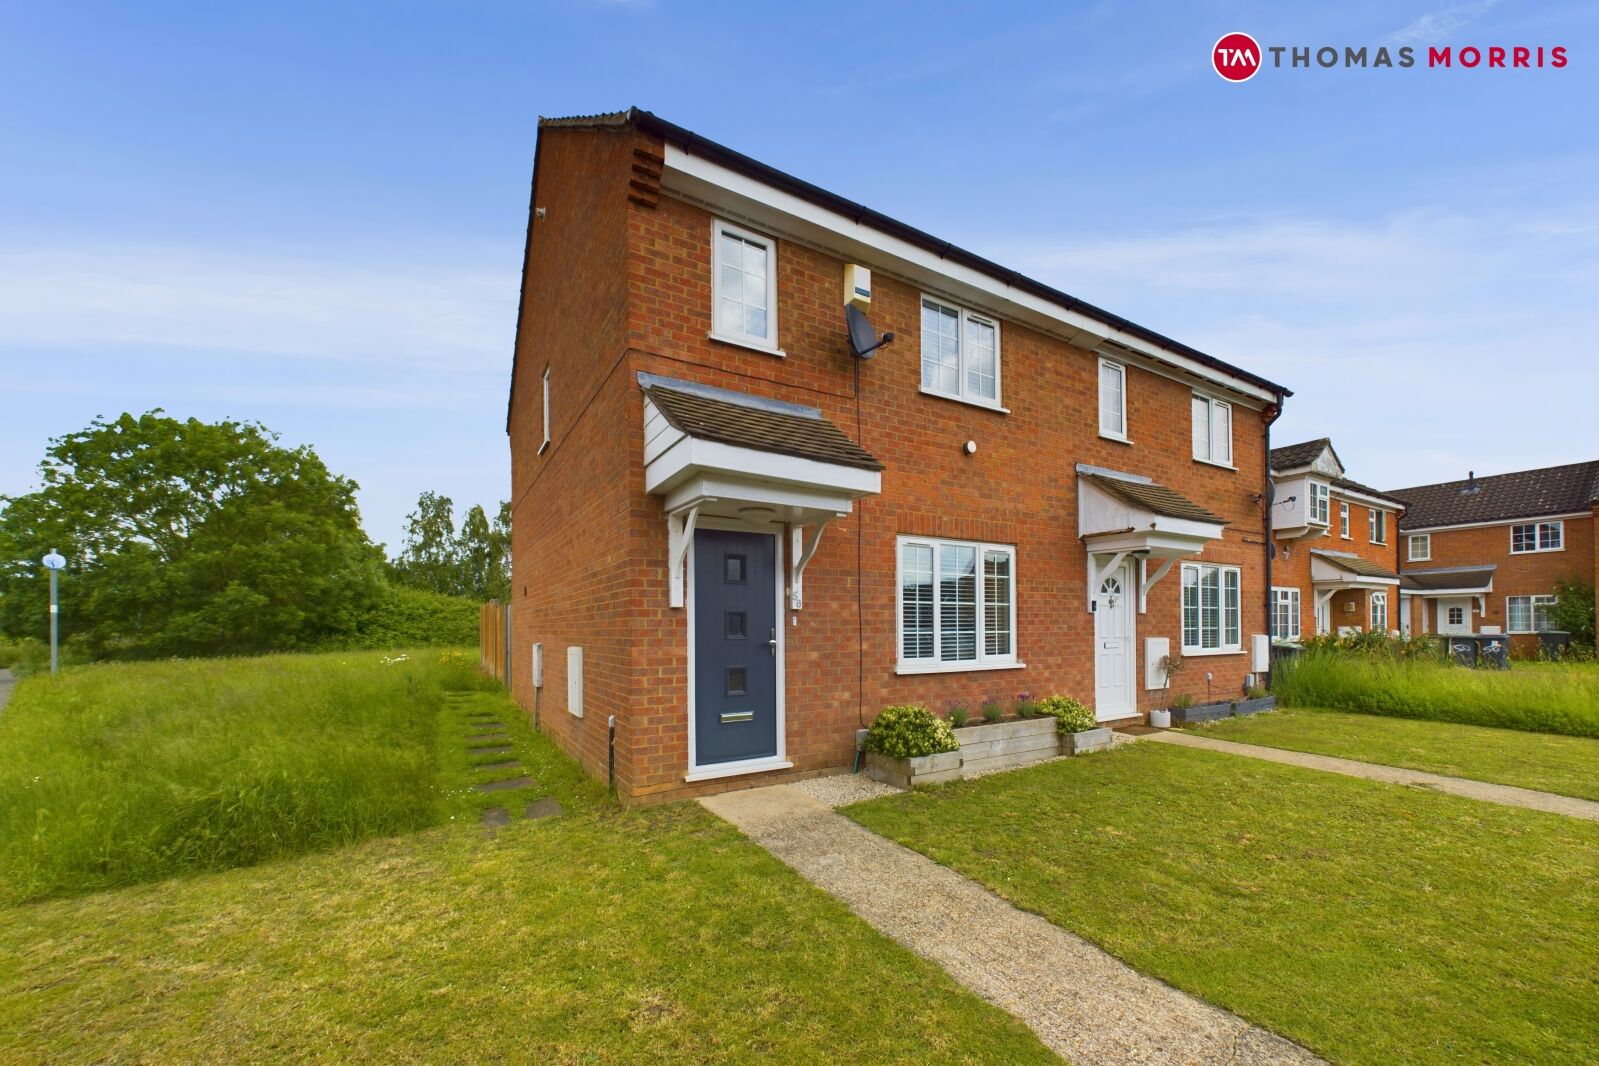 3 bedroom end terraced house for sale Lincoln Crescent, Biggleswade, SG18, main image